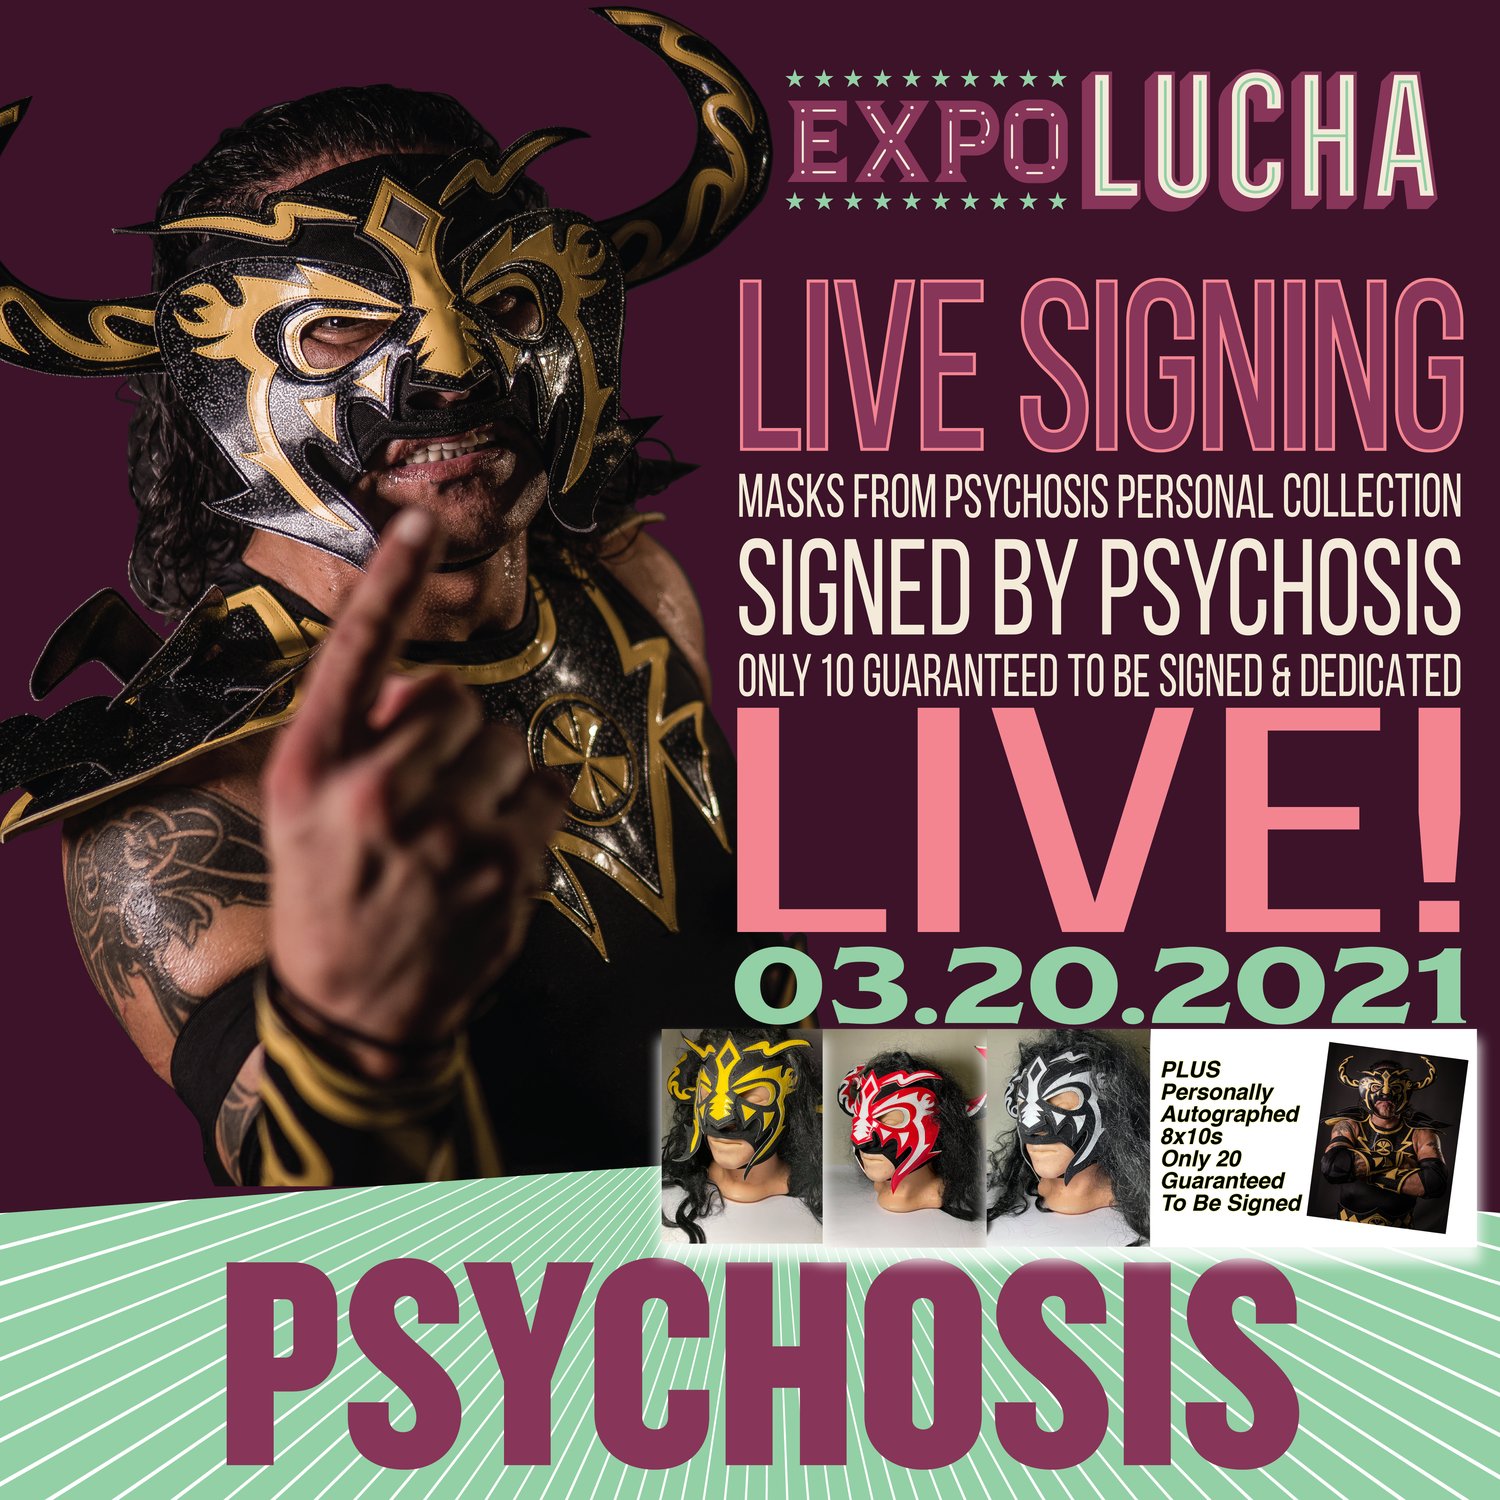 Image of Psychosis Masks To Be Personally Autographed LIVE